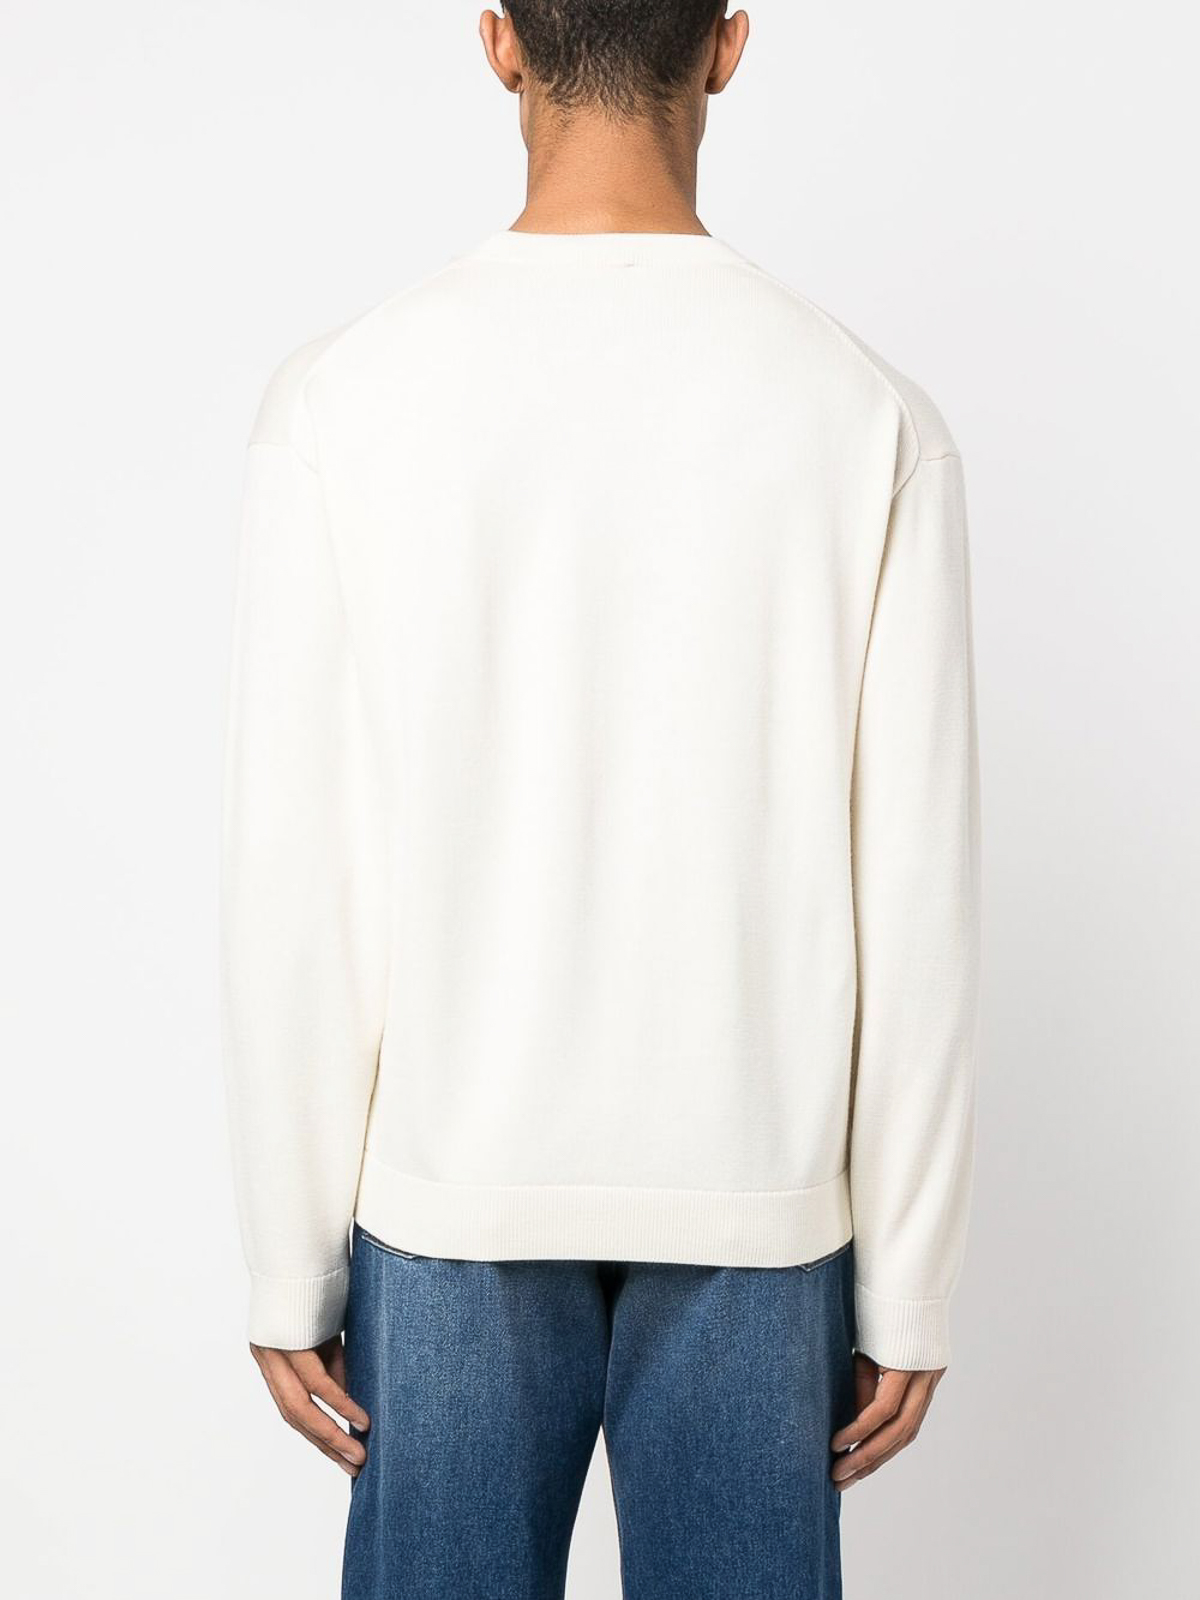 Shop Kenzo Flower Patch Crewneck In White